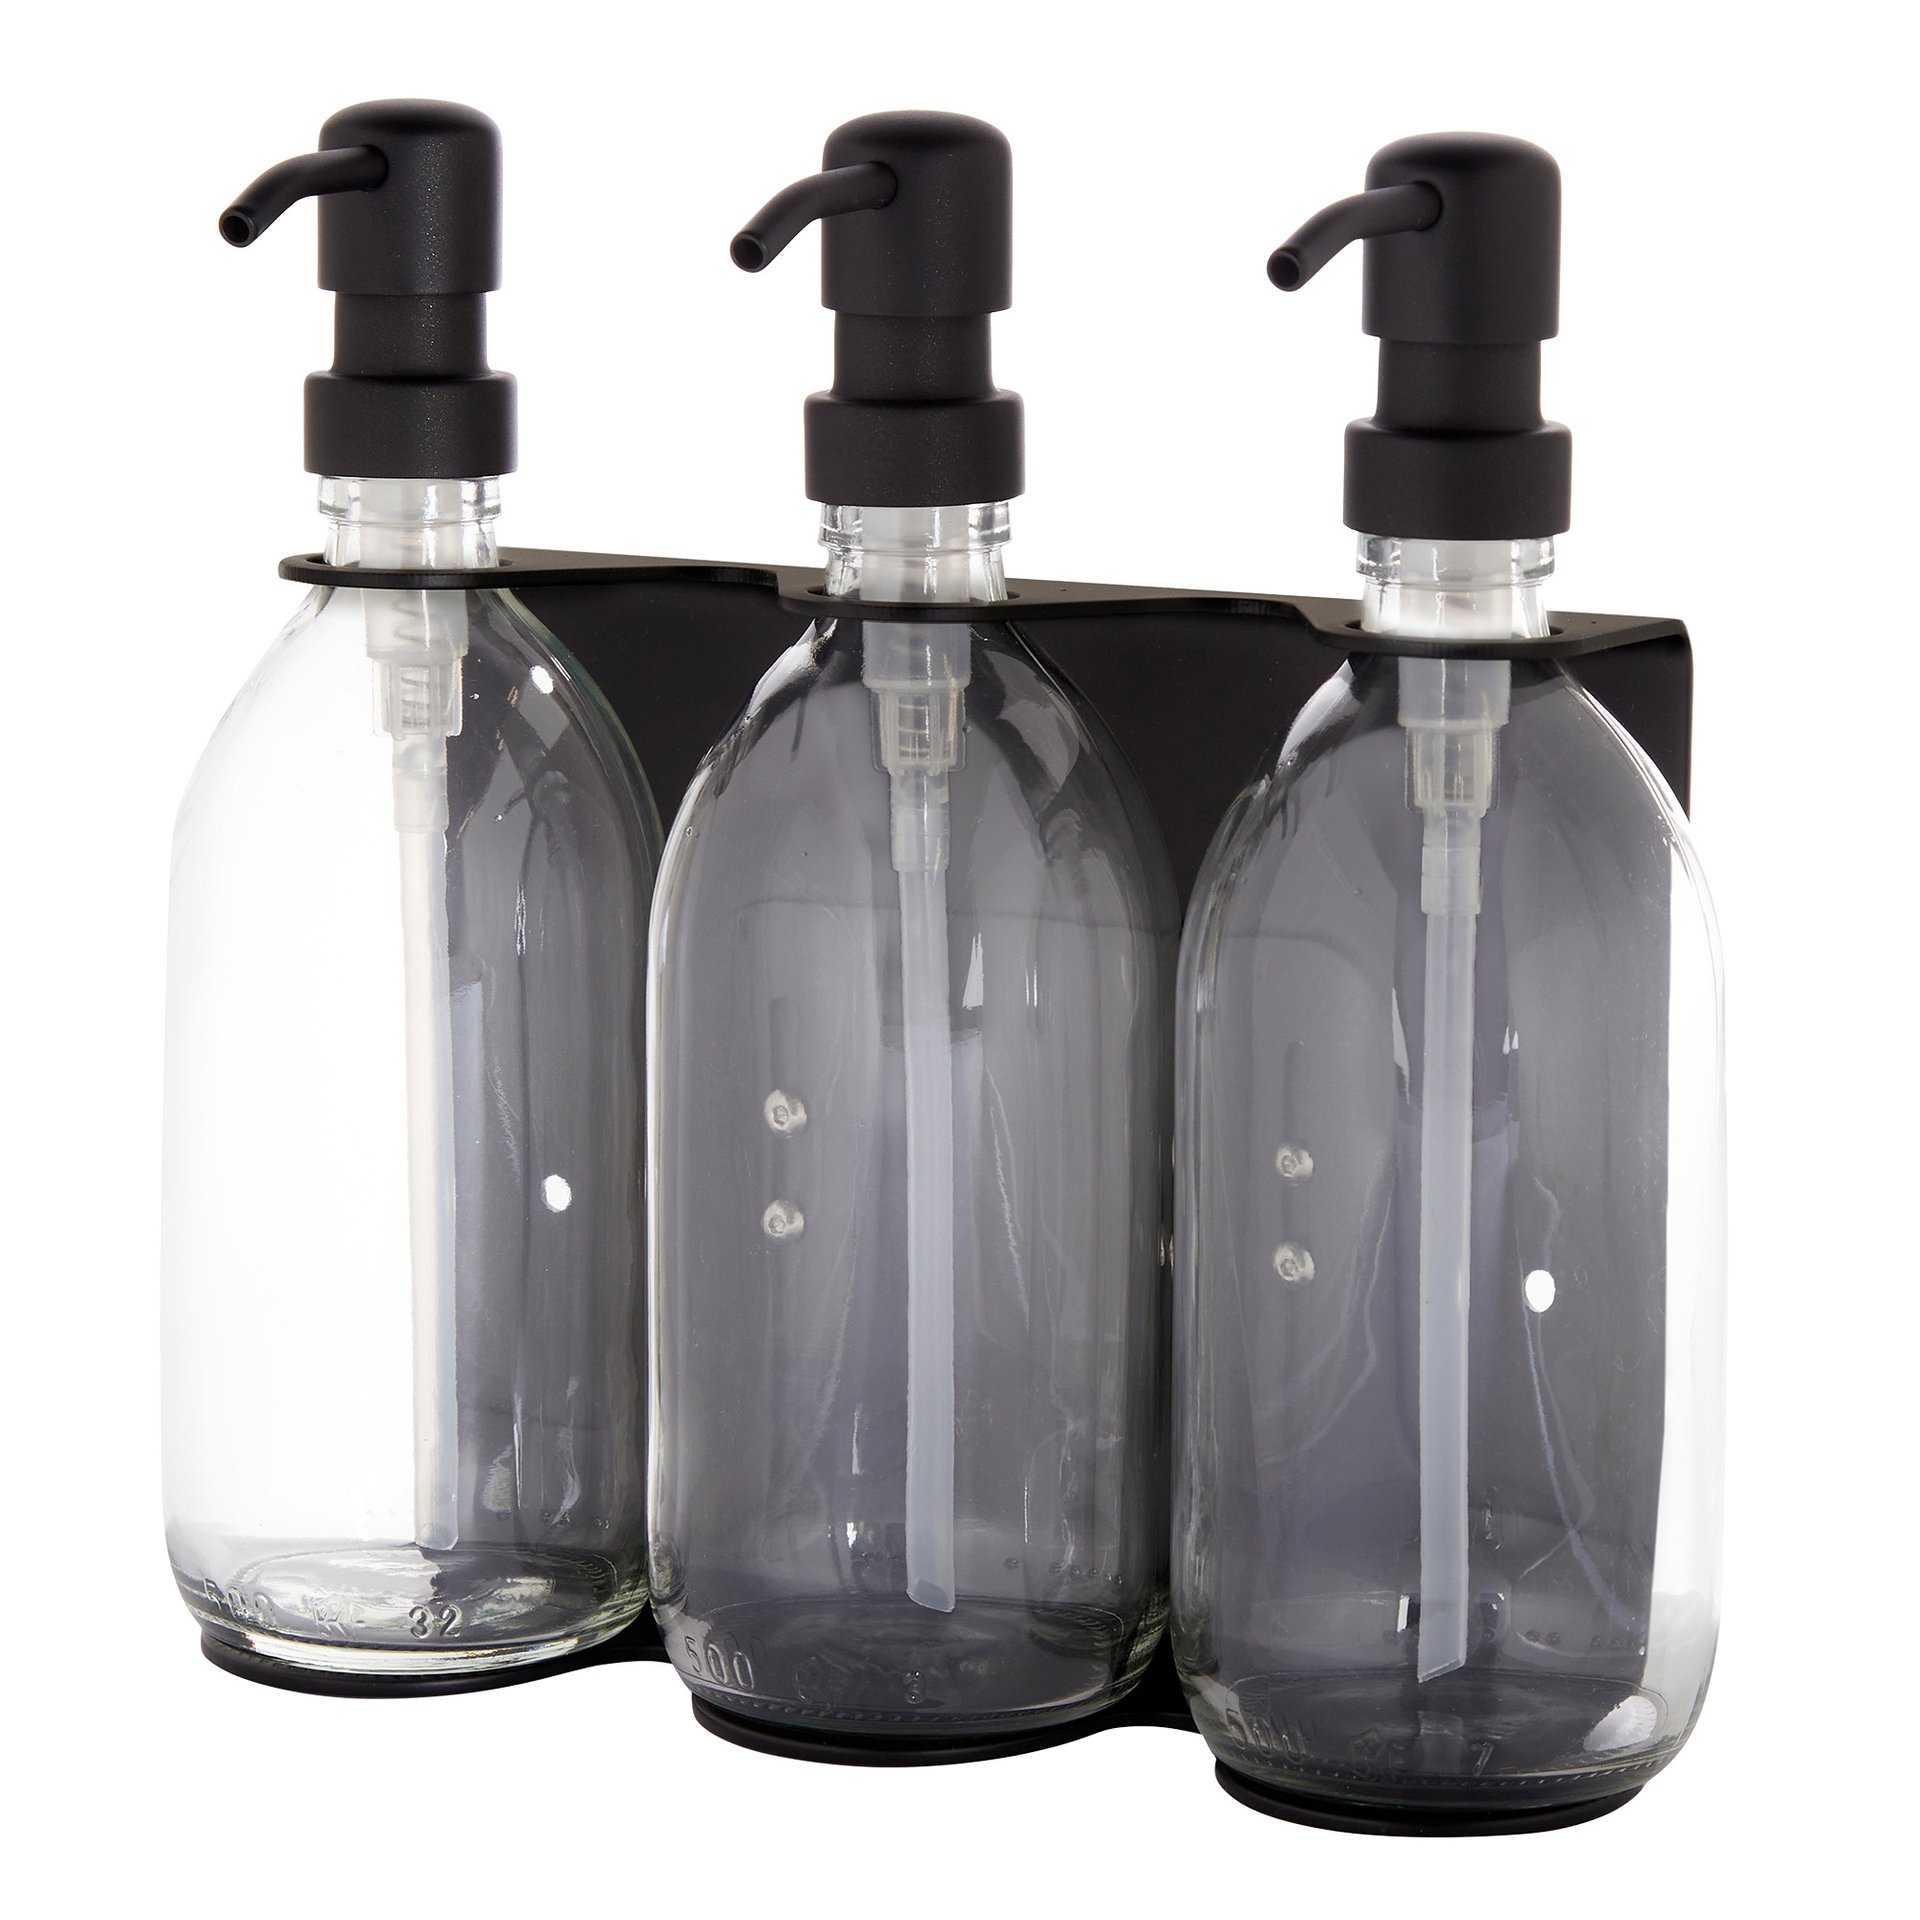 Triple wall mounted soap dispenser in black with clear transparent dispensers and black pumps